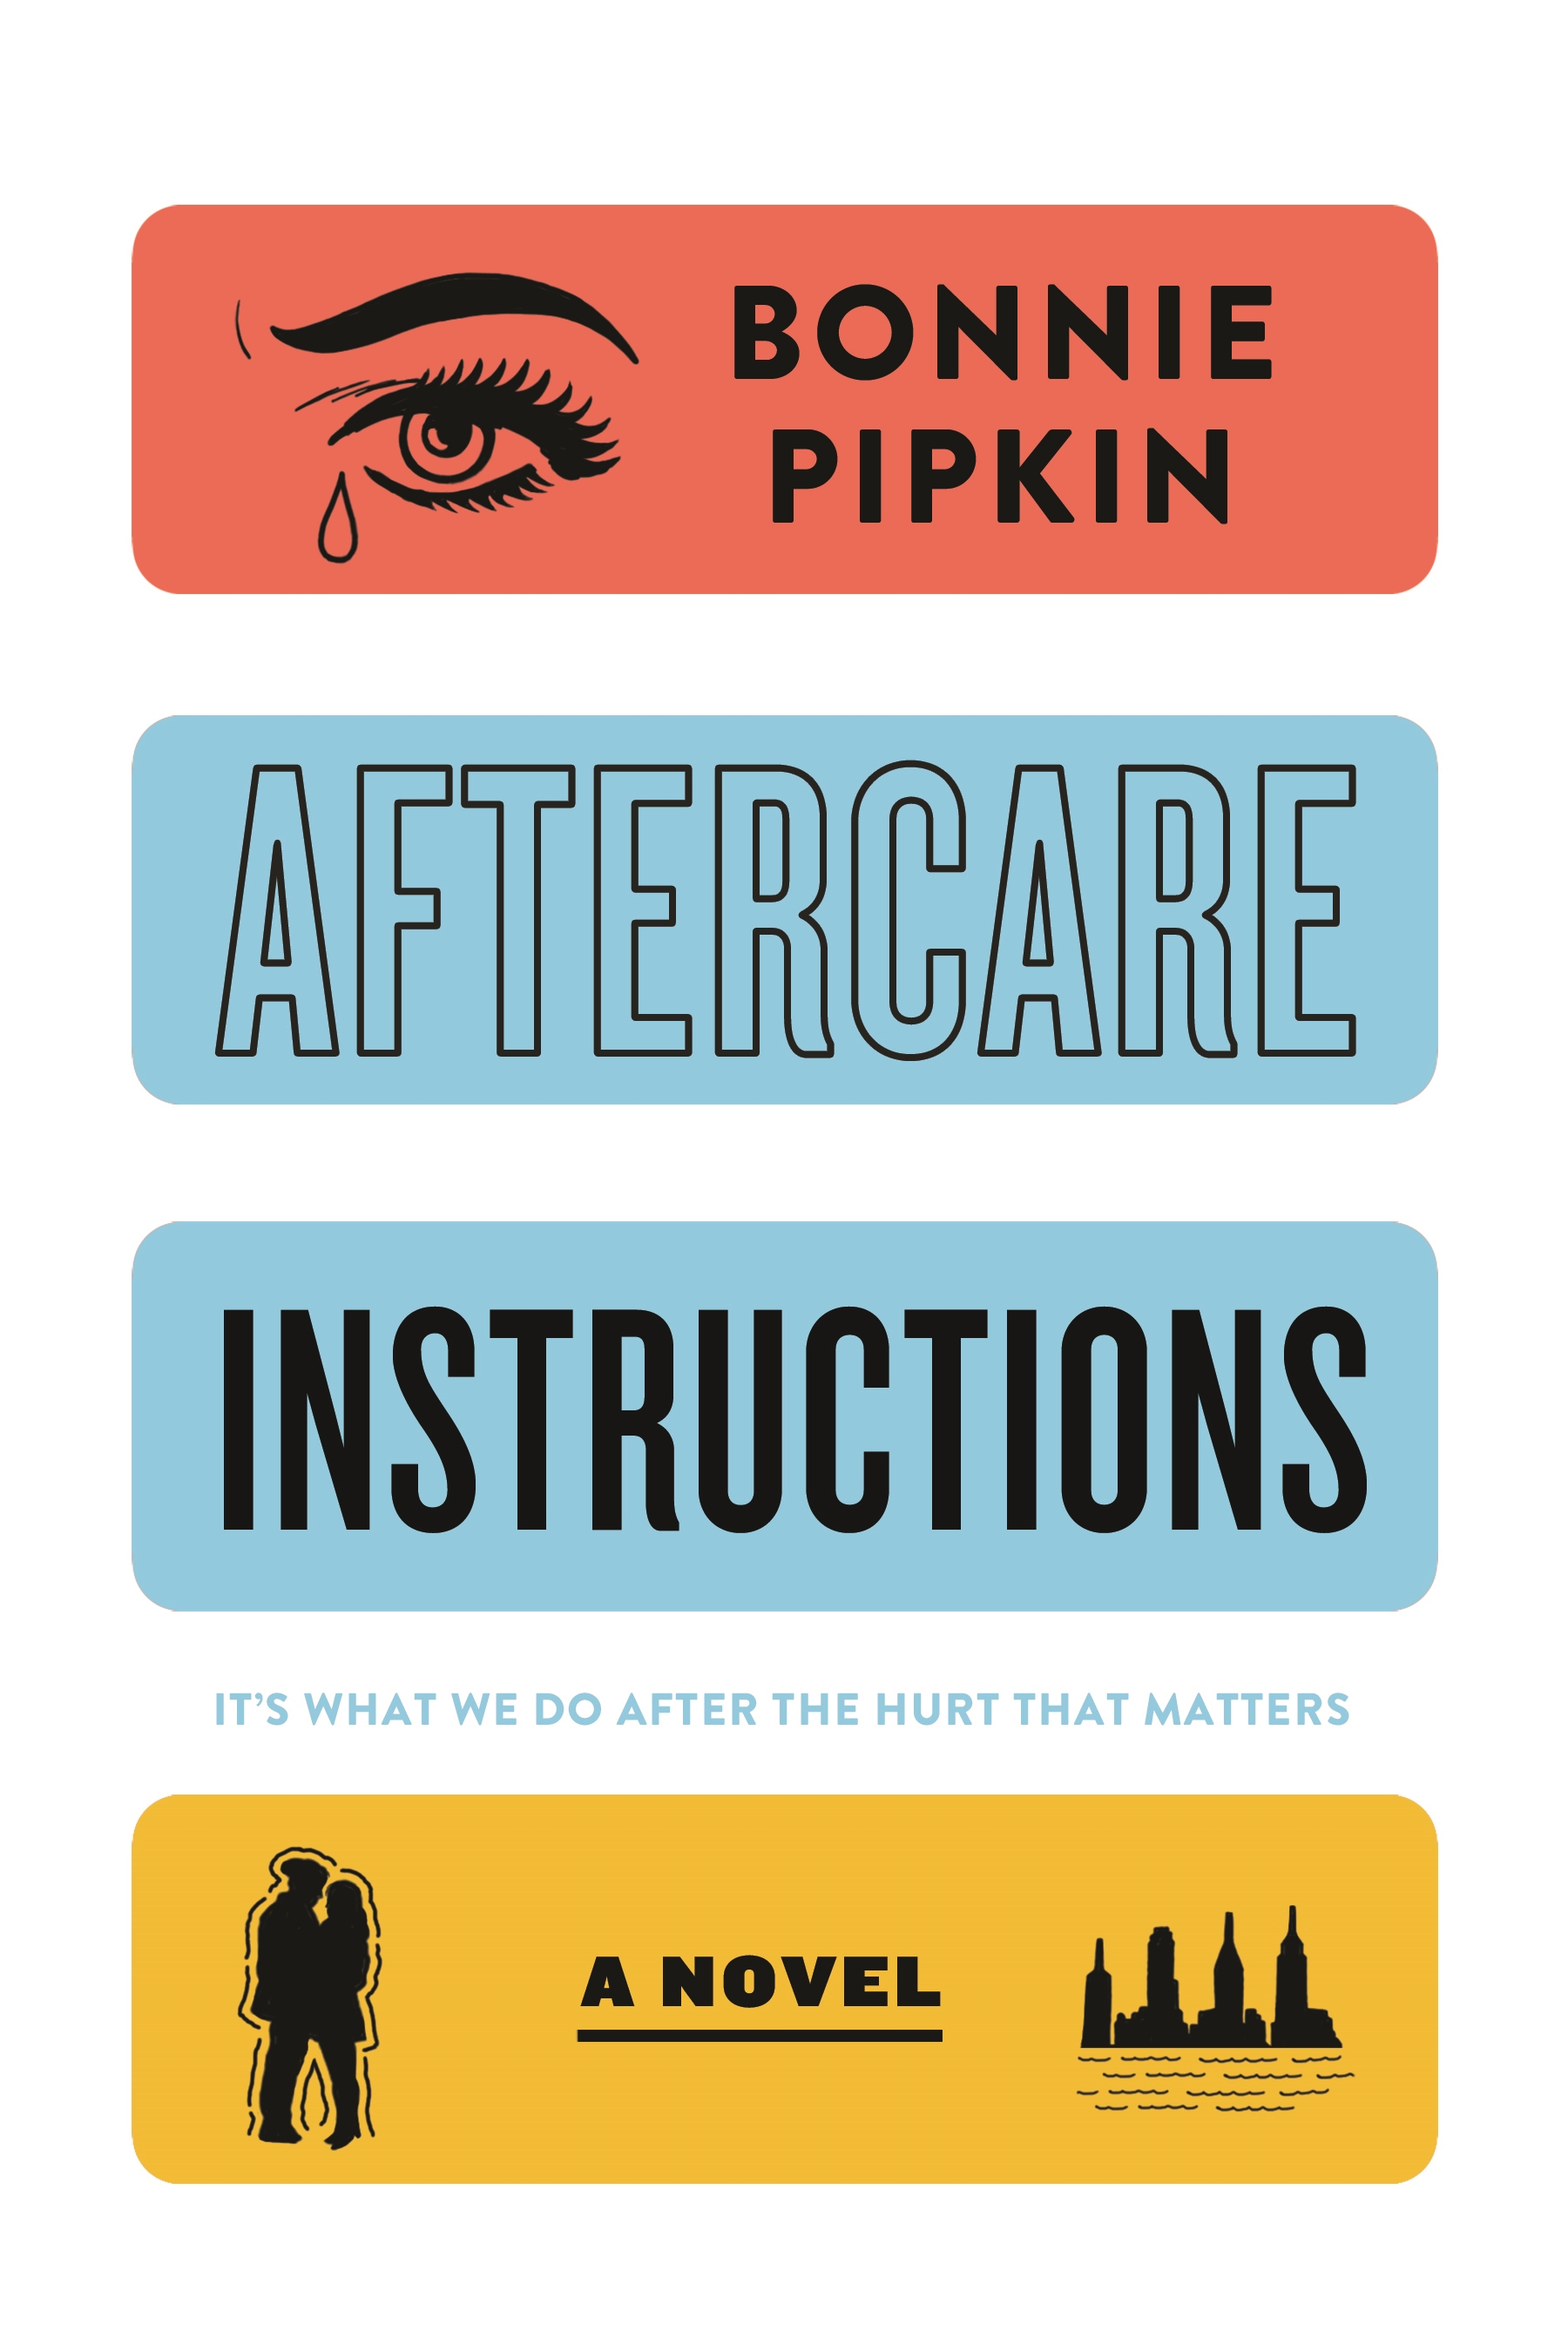 Book Launch: Aftercare Instructions by Bonnie Pipkin